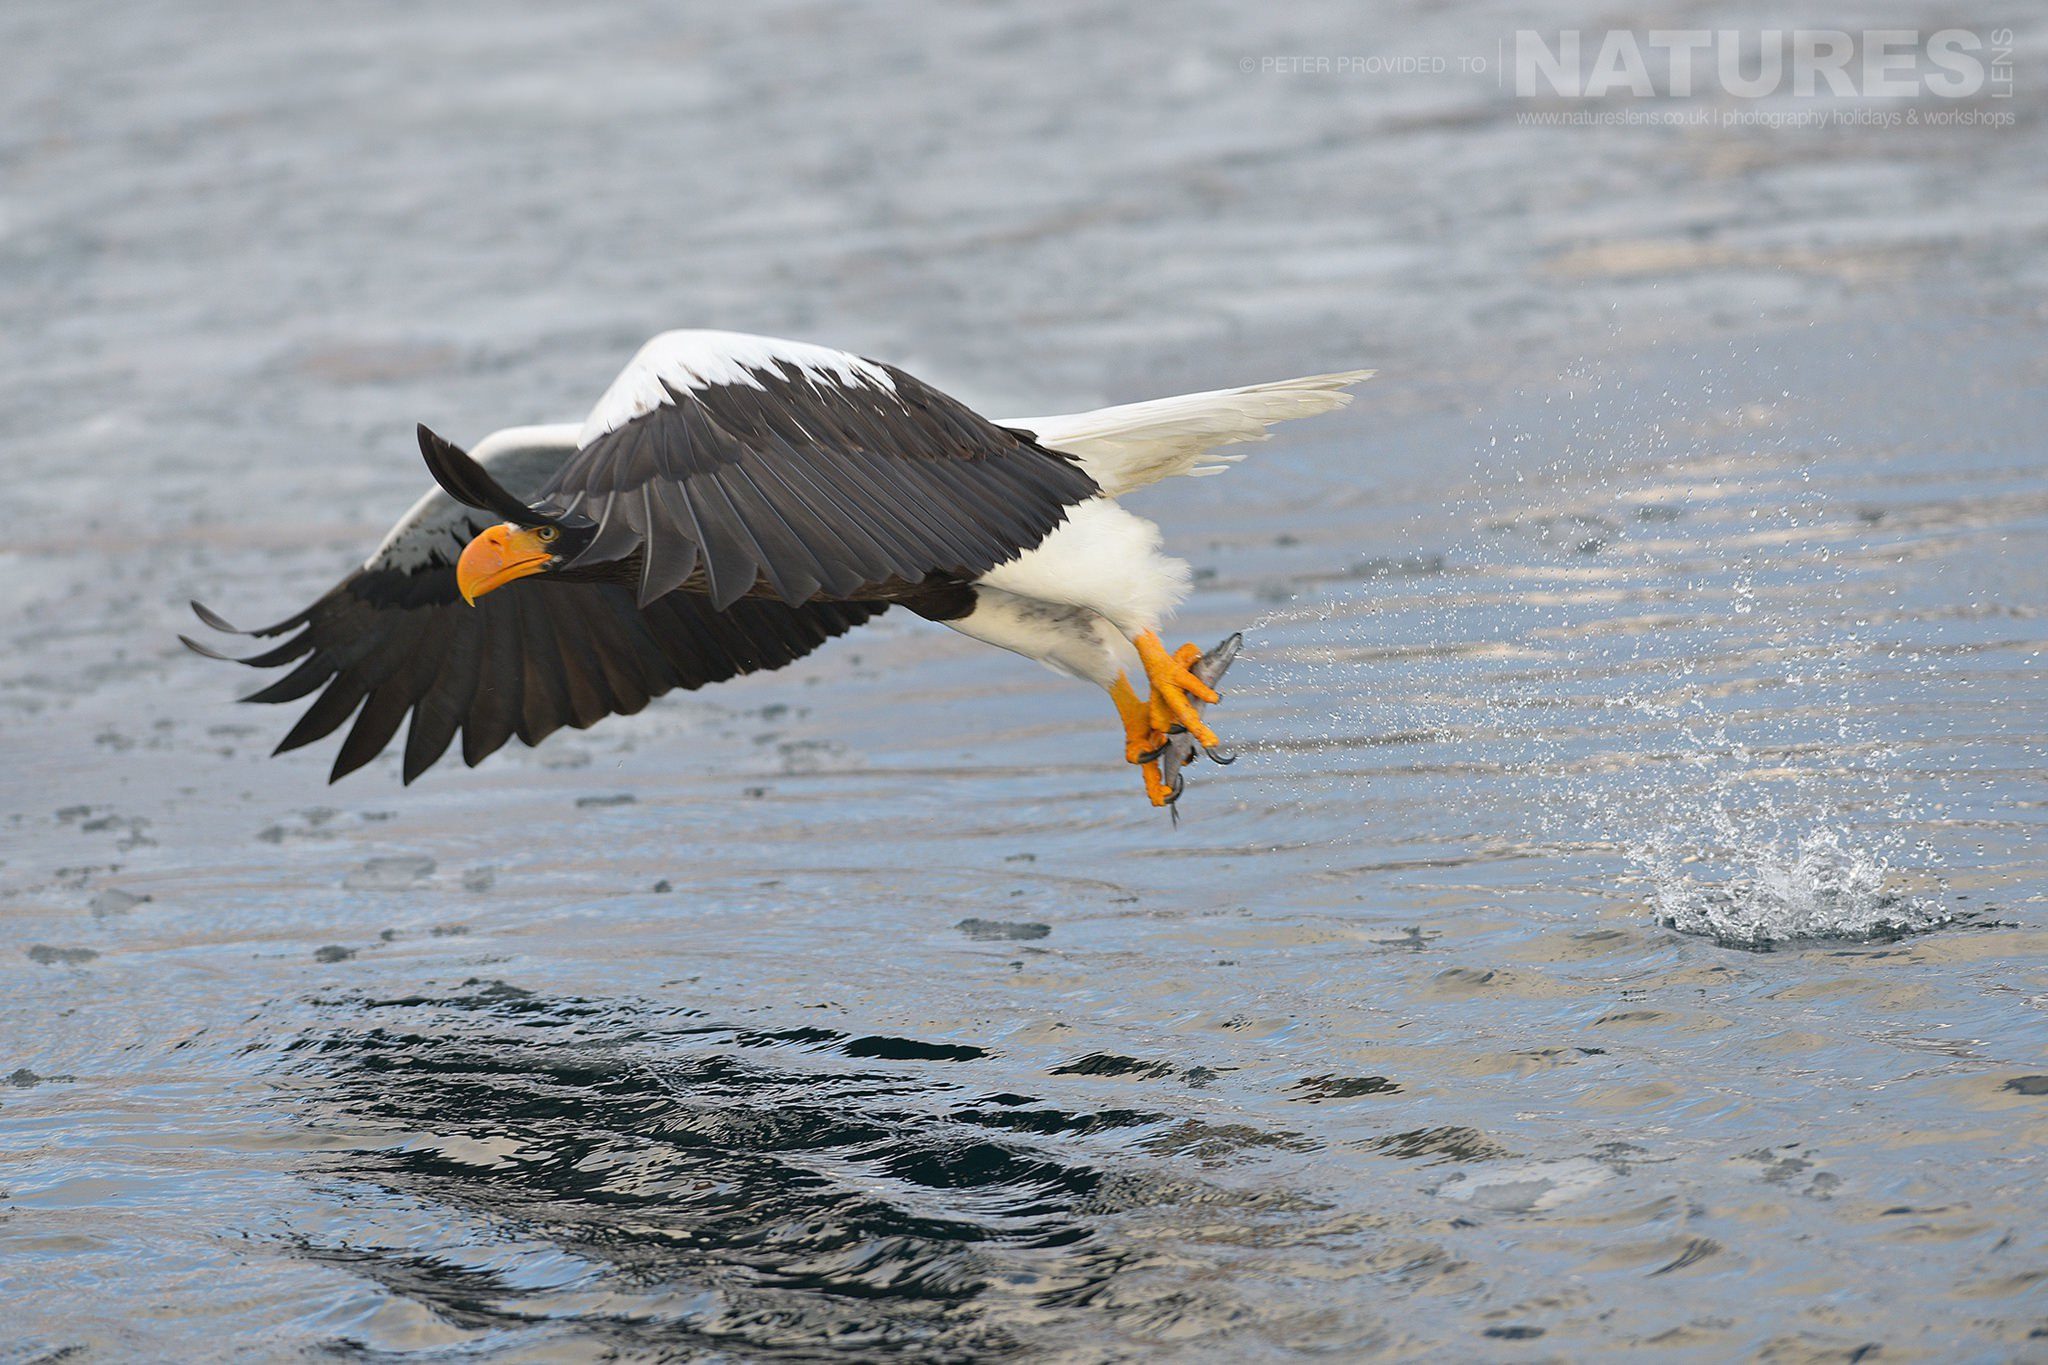 A Steller'S Sea Eagle Flies Away Having Successfully Grabbed A Fish From The Rausu Seas - This Image Was Captured On The Island Of Hokkaido During The Natureslens Winter Wildlife Of Japan Photography Holiday